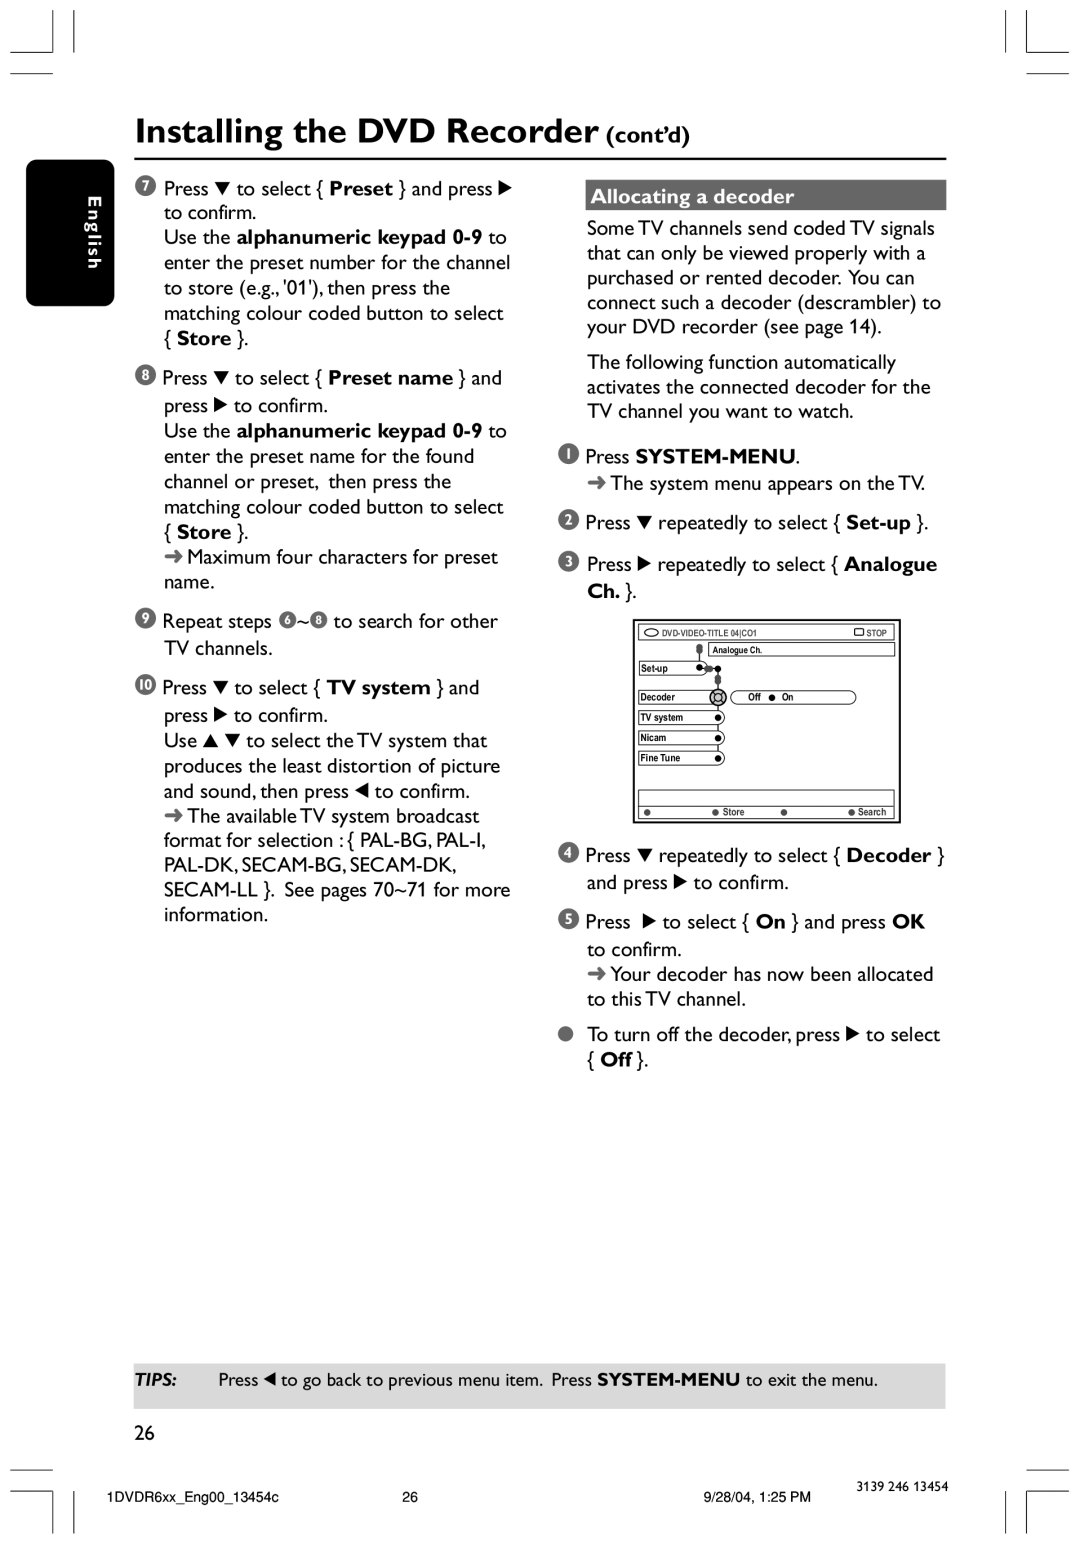 Philips DVDR612/97 user manual Installing the DVD Recorder cont’d, Store 